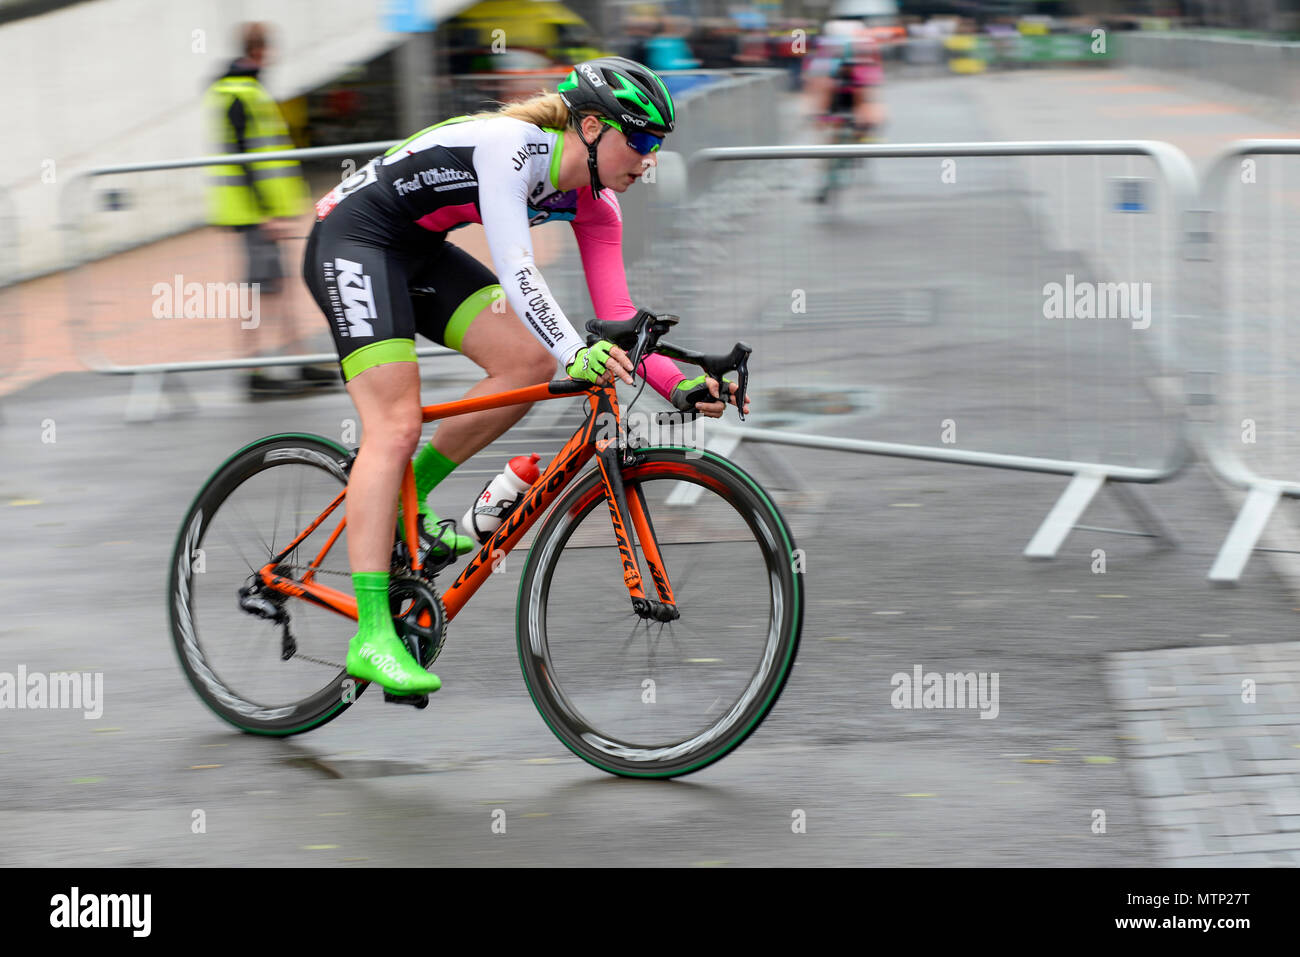 Poppy Thompson of YRDP racing in the elite women's 2018 OVO Energy Tour Series cycle race at Wembley, London, UK. Round 7 bike race. Stock Photo